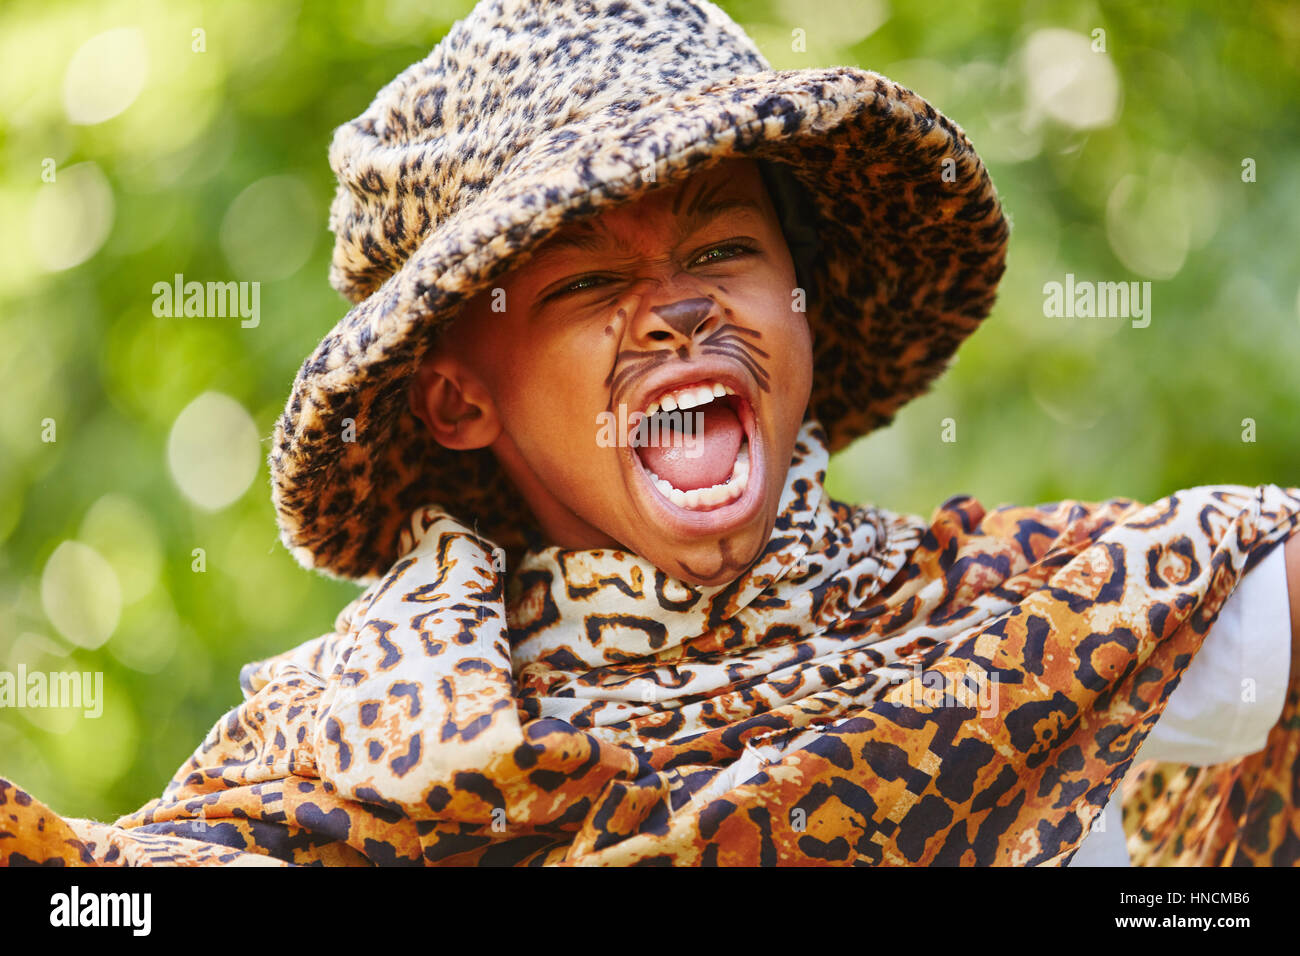 African child with creative leopard costume having fun in school play Stock Photo